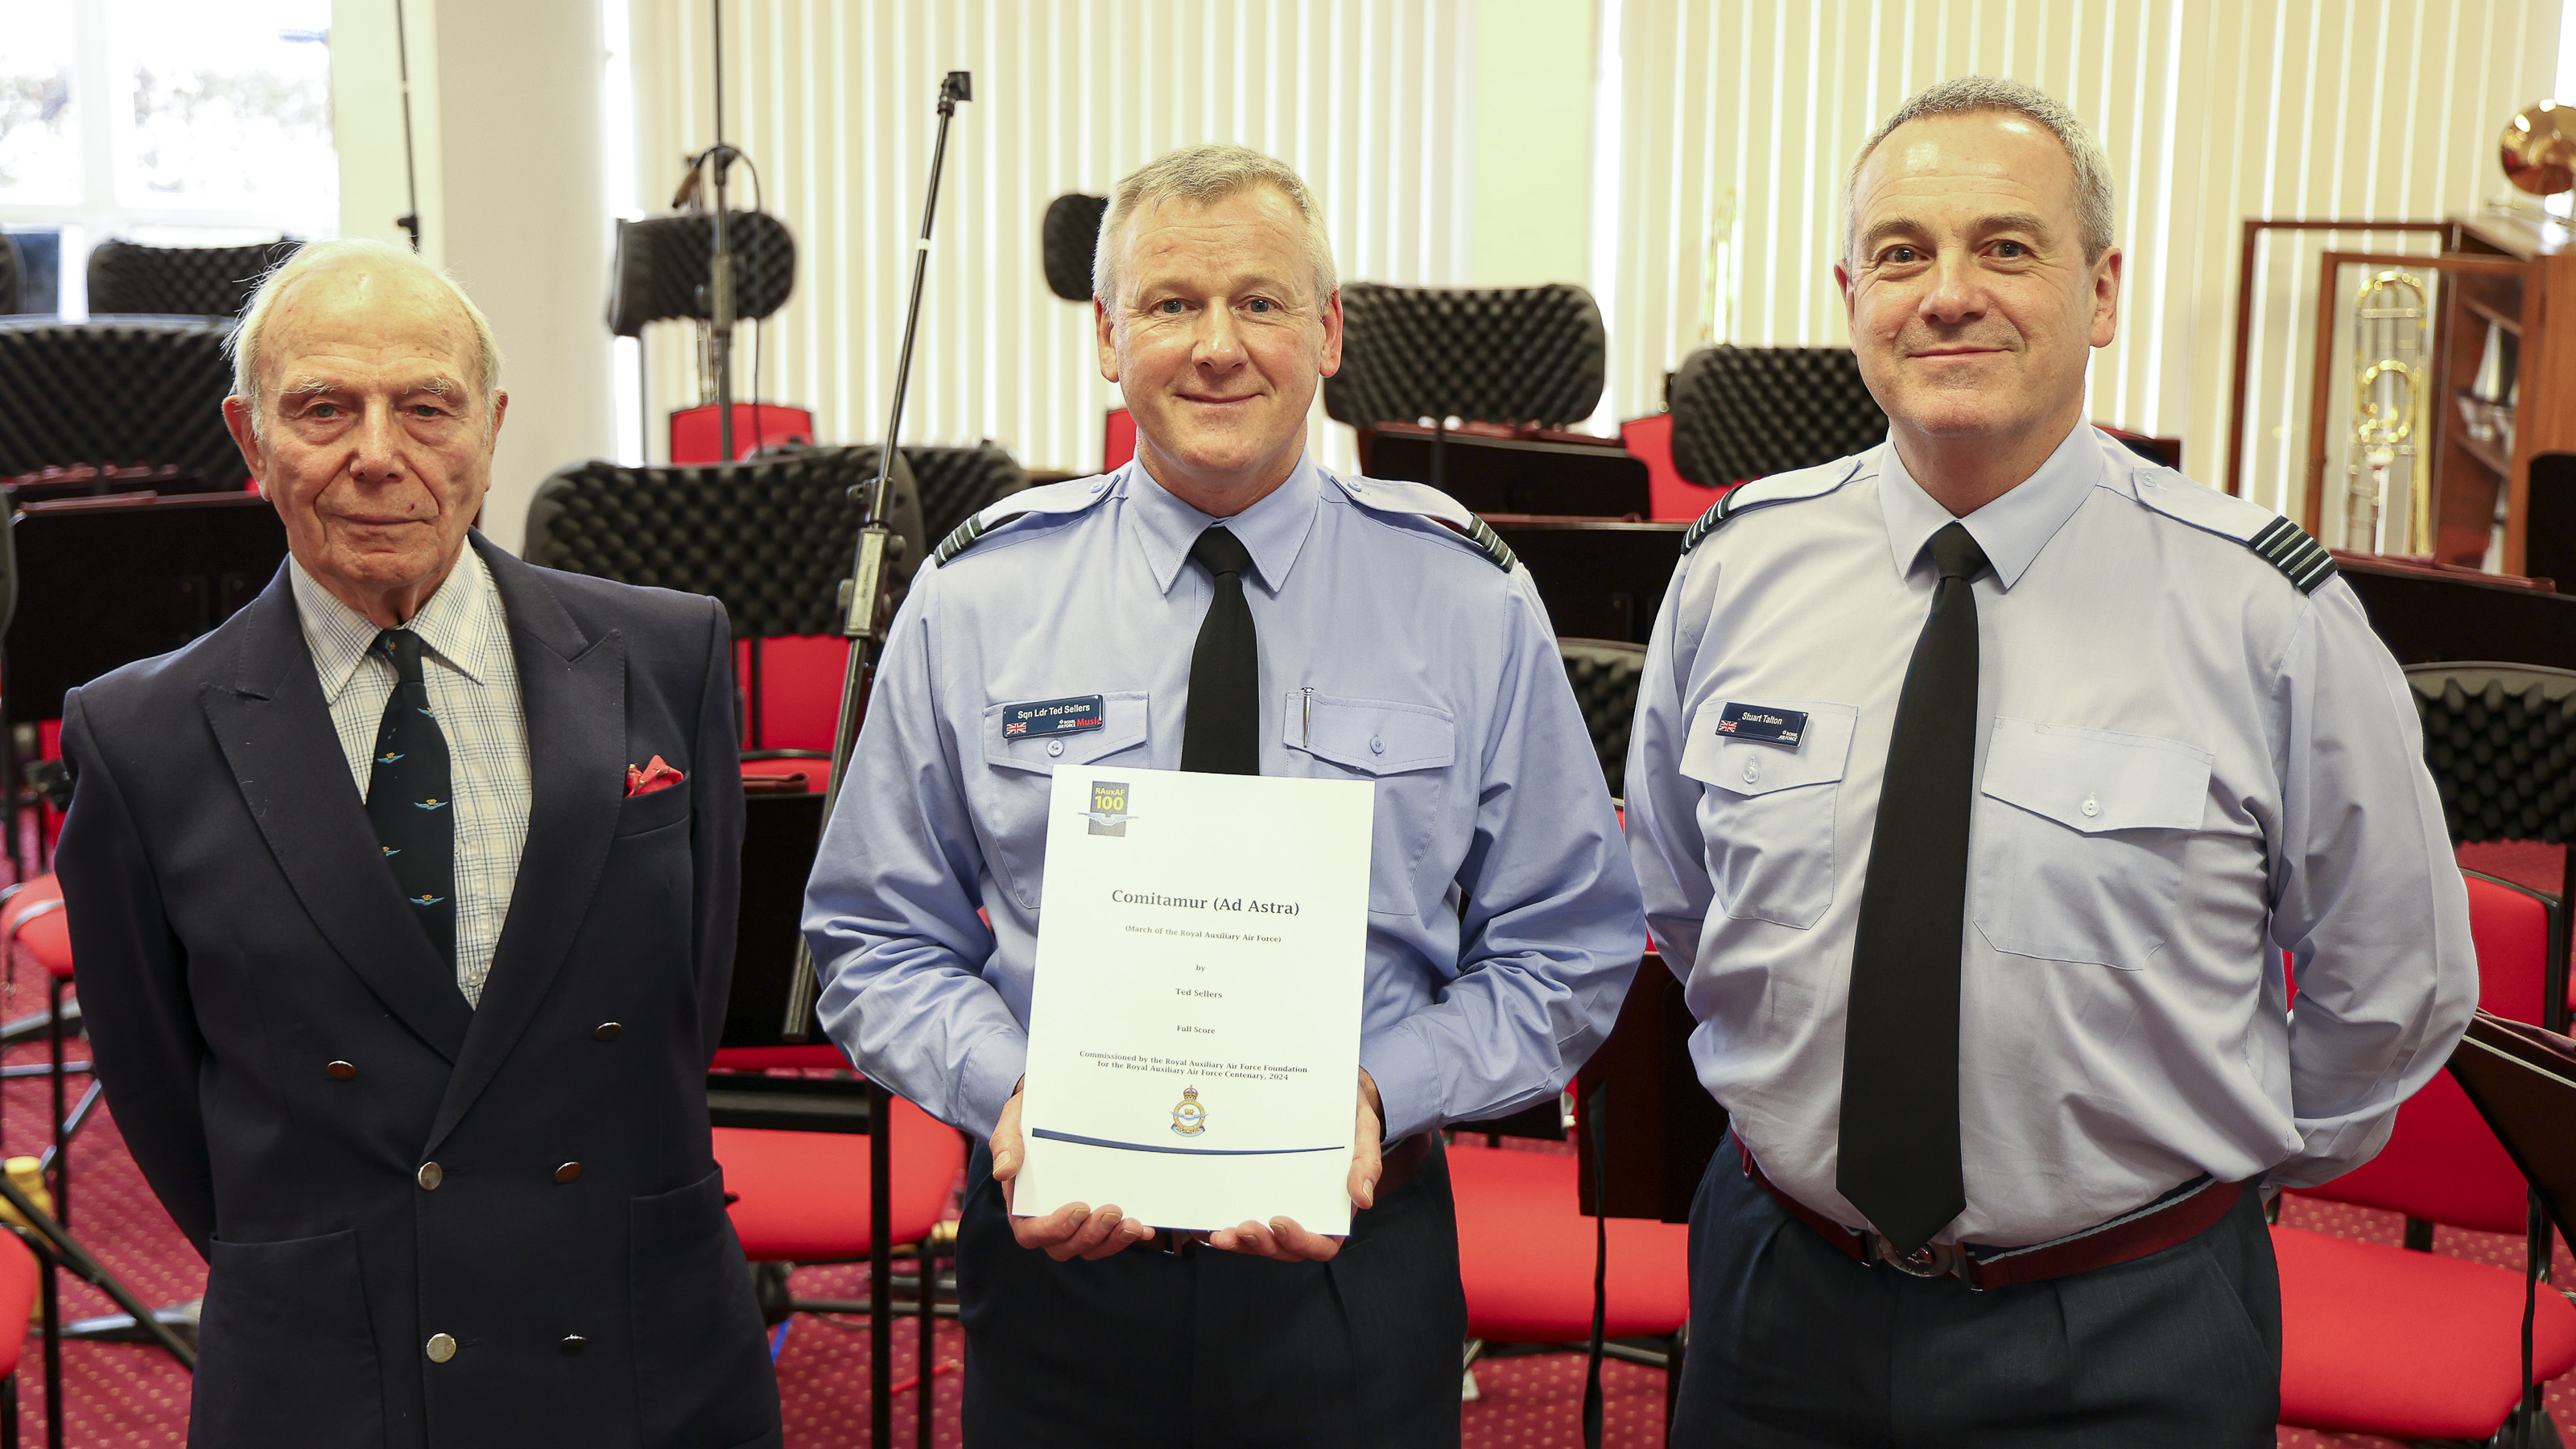 Squadron Leader Sellers, Director of Music Band of the RAuxAF, gives a presentation copy of the score to Group Captain Richard Mighall OBE (Retd) – Chairman of the RAuxAF Foundation and Wing Commander Stuart Talton QVRM - Dept Inspector RAuxAF